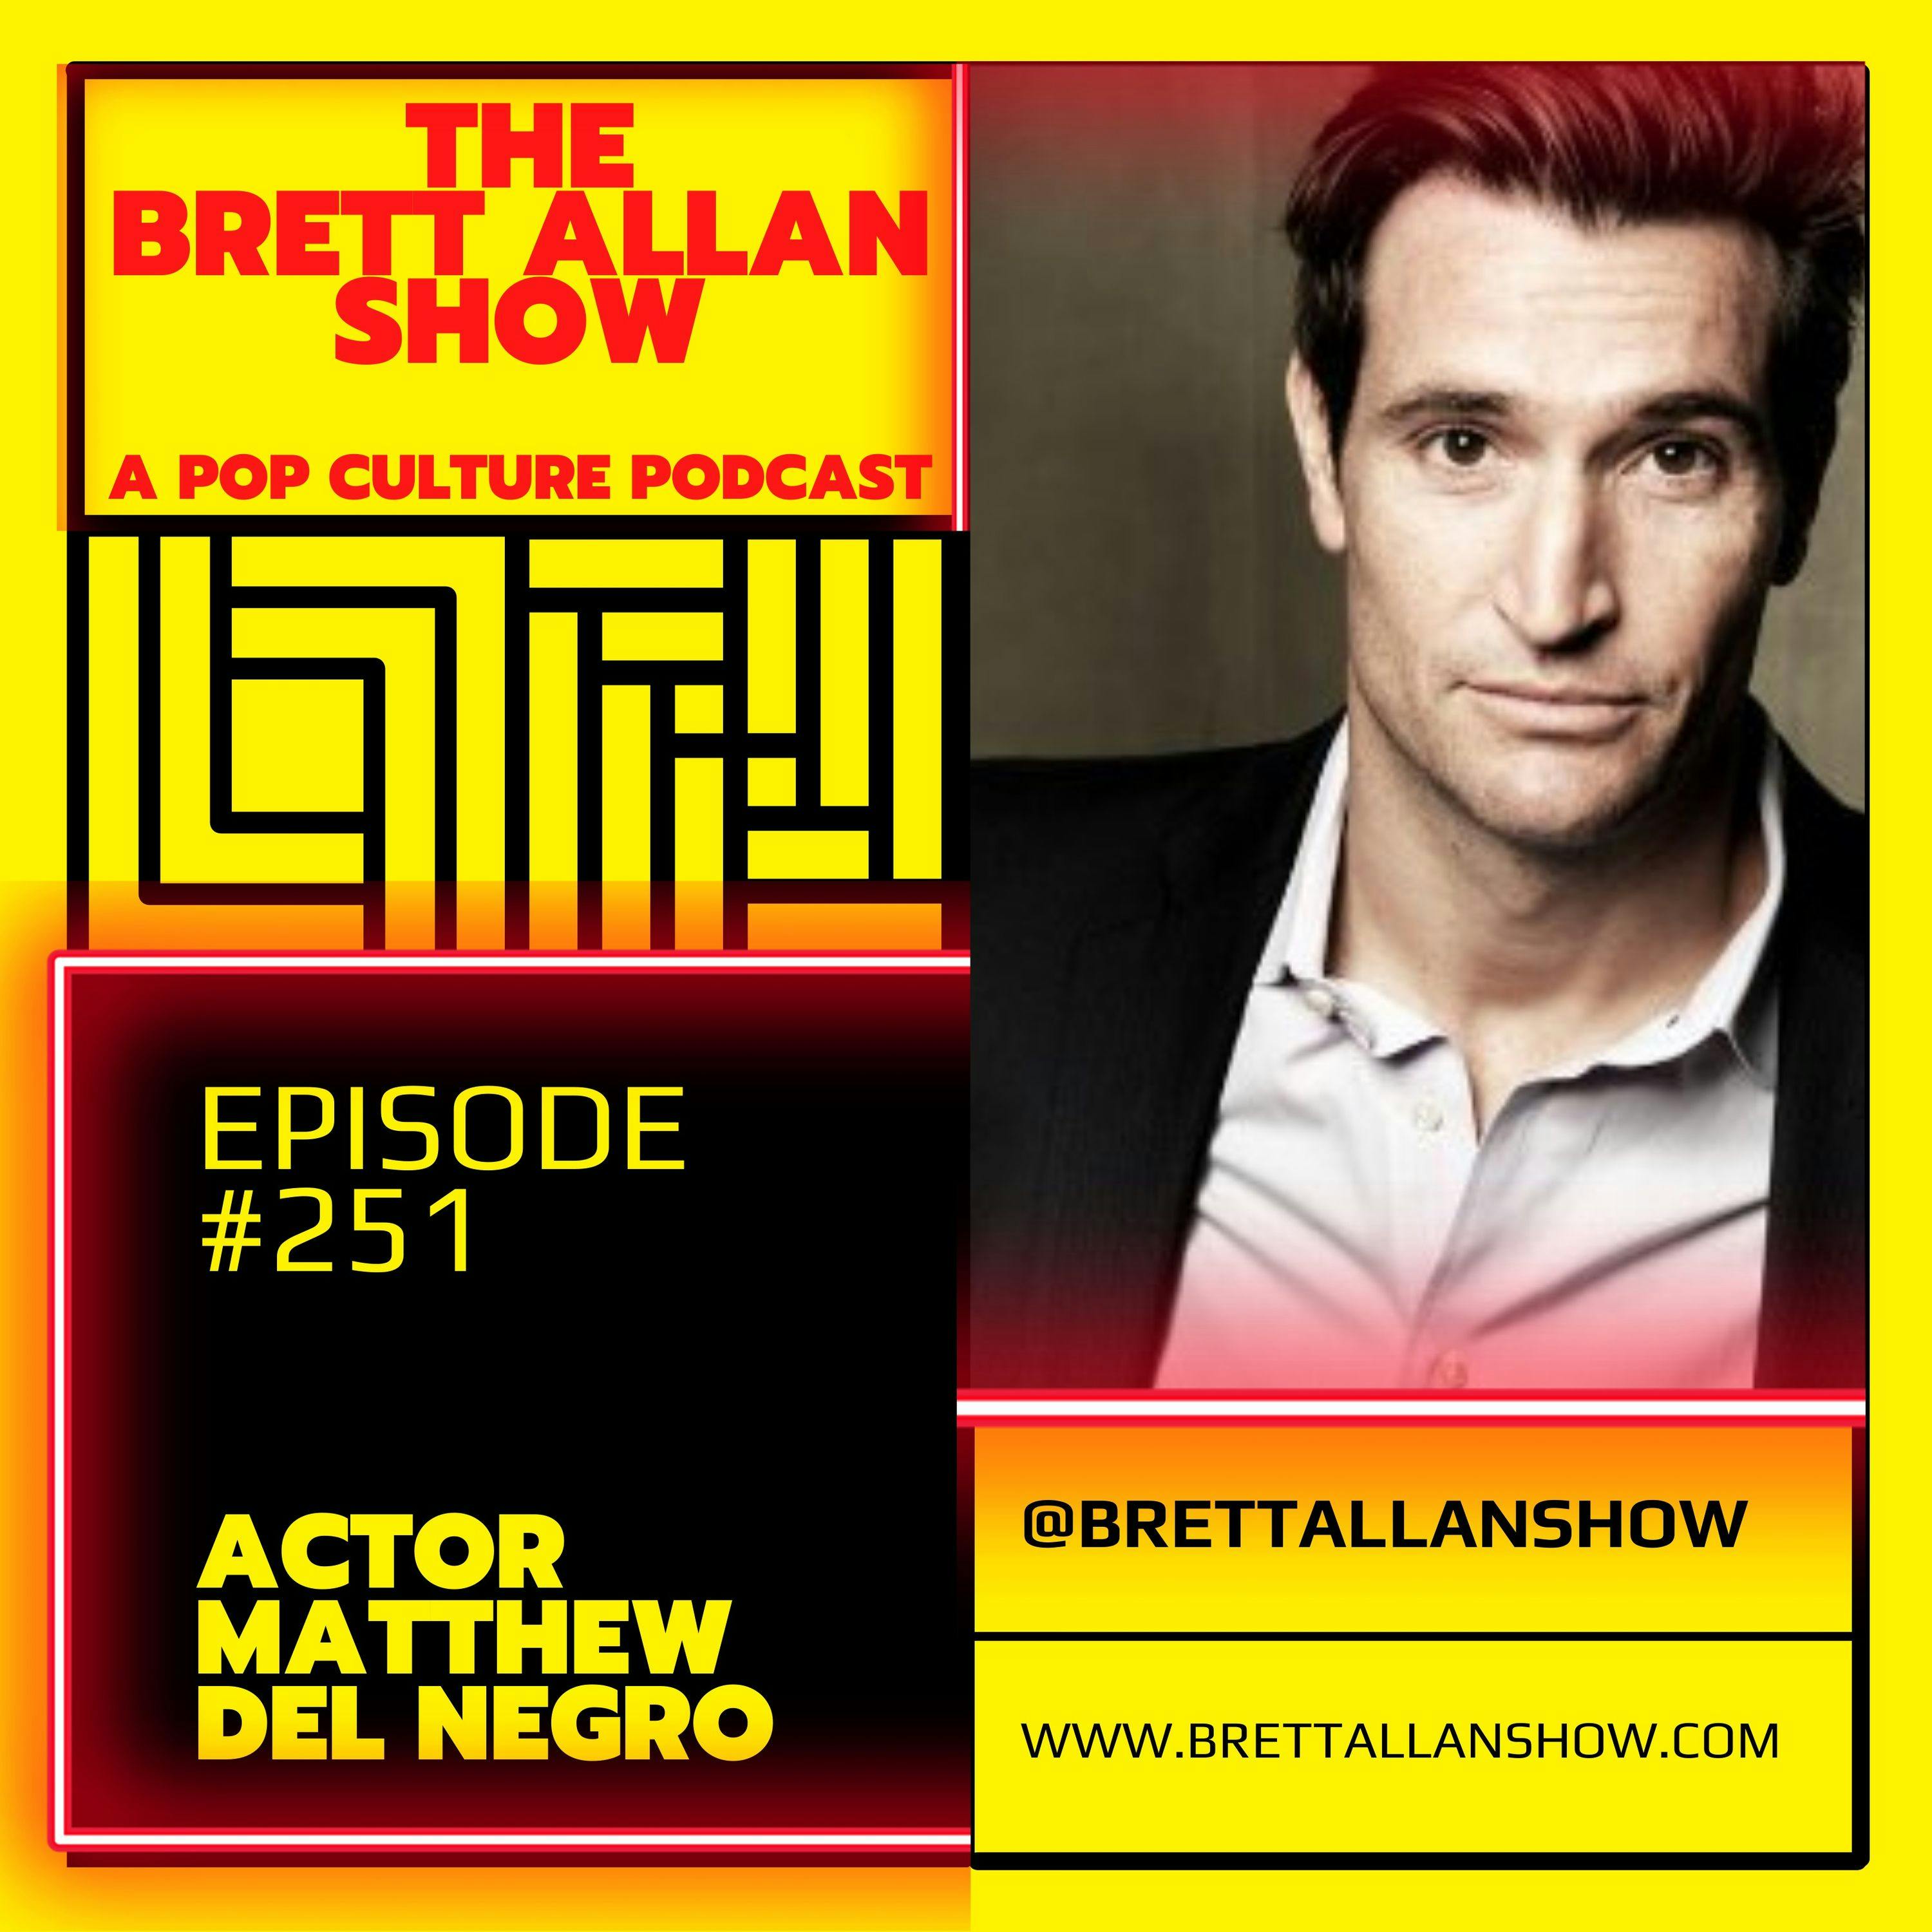 Actor Matthew Del Negro Discusses His Book and Podcast |"10,000 No's: How to Overcome Rejection on the Way to Your YES" Image